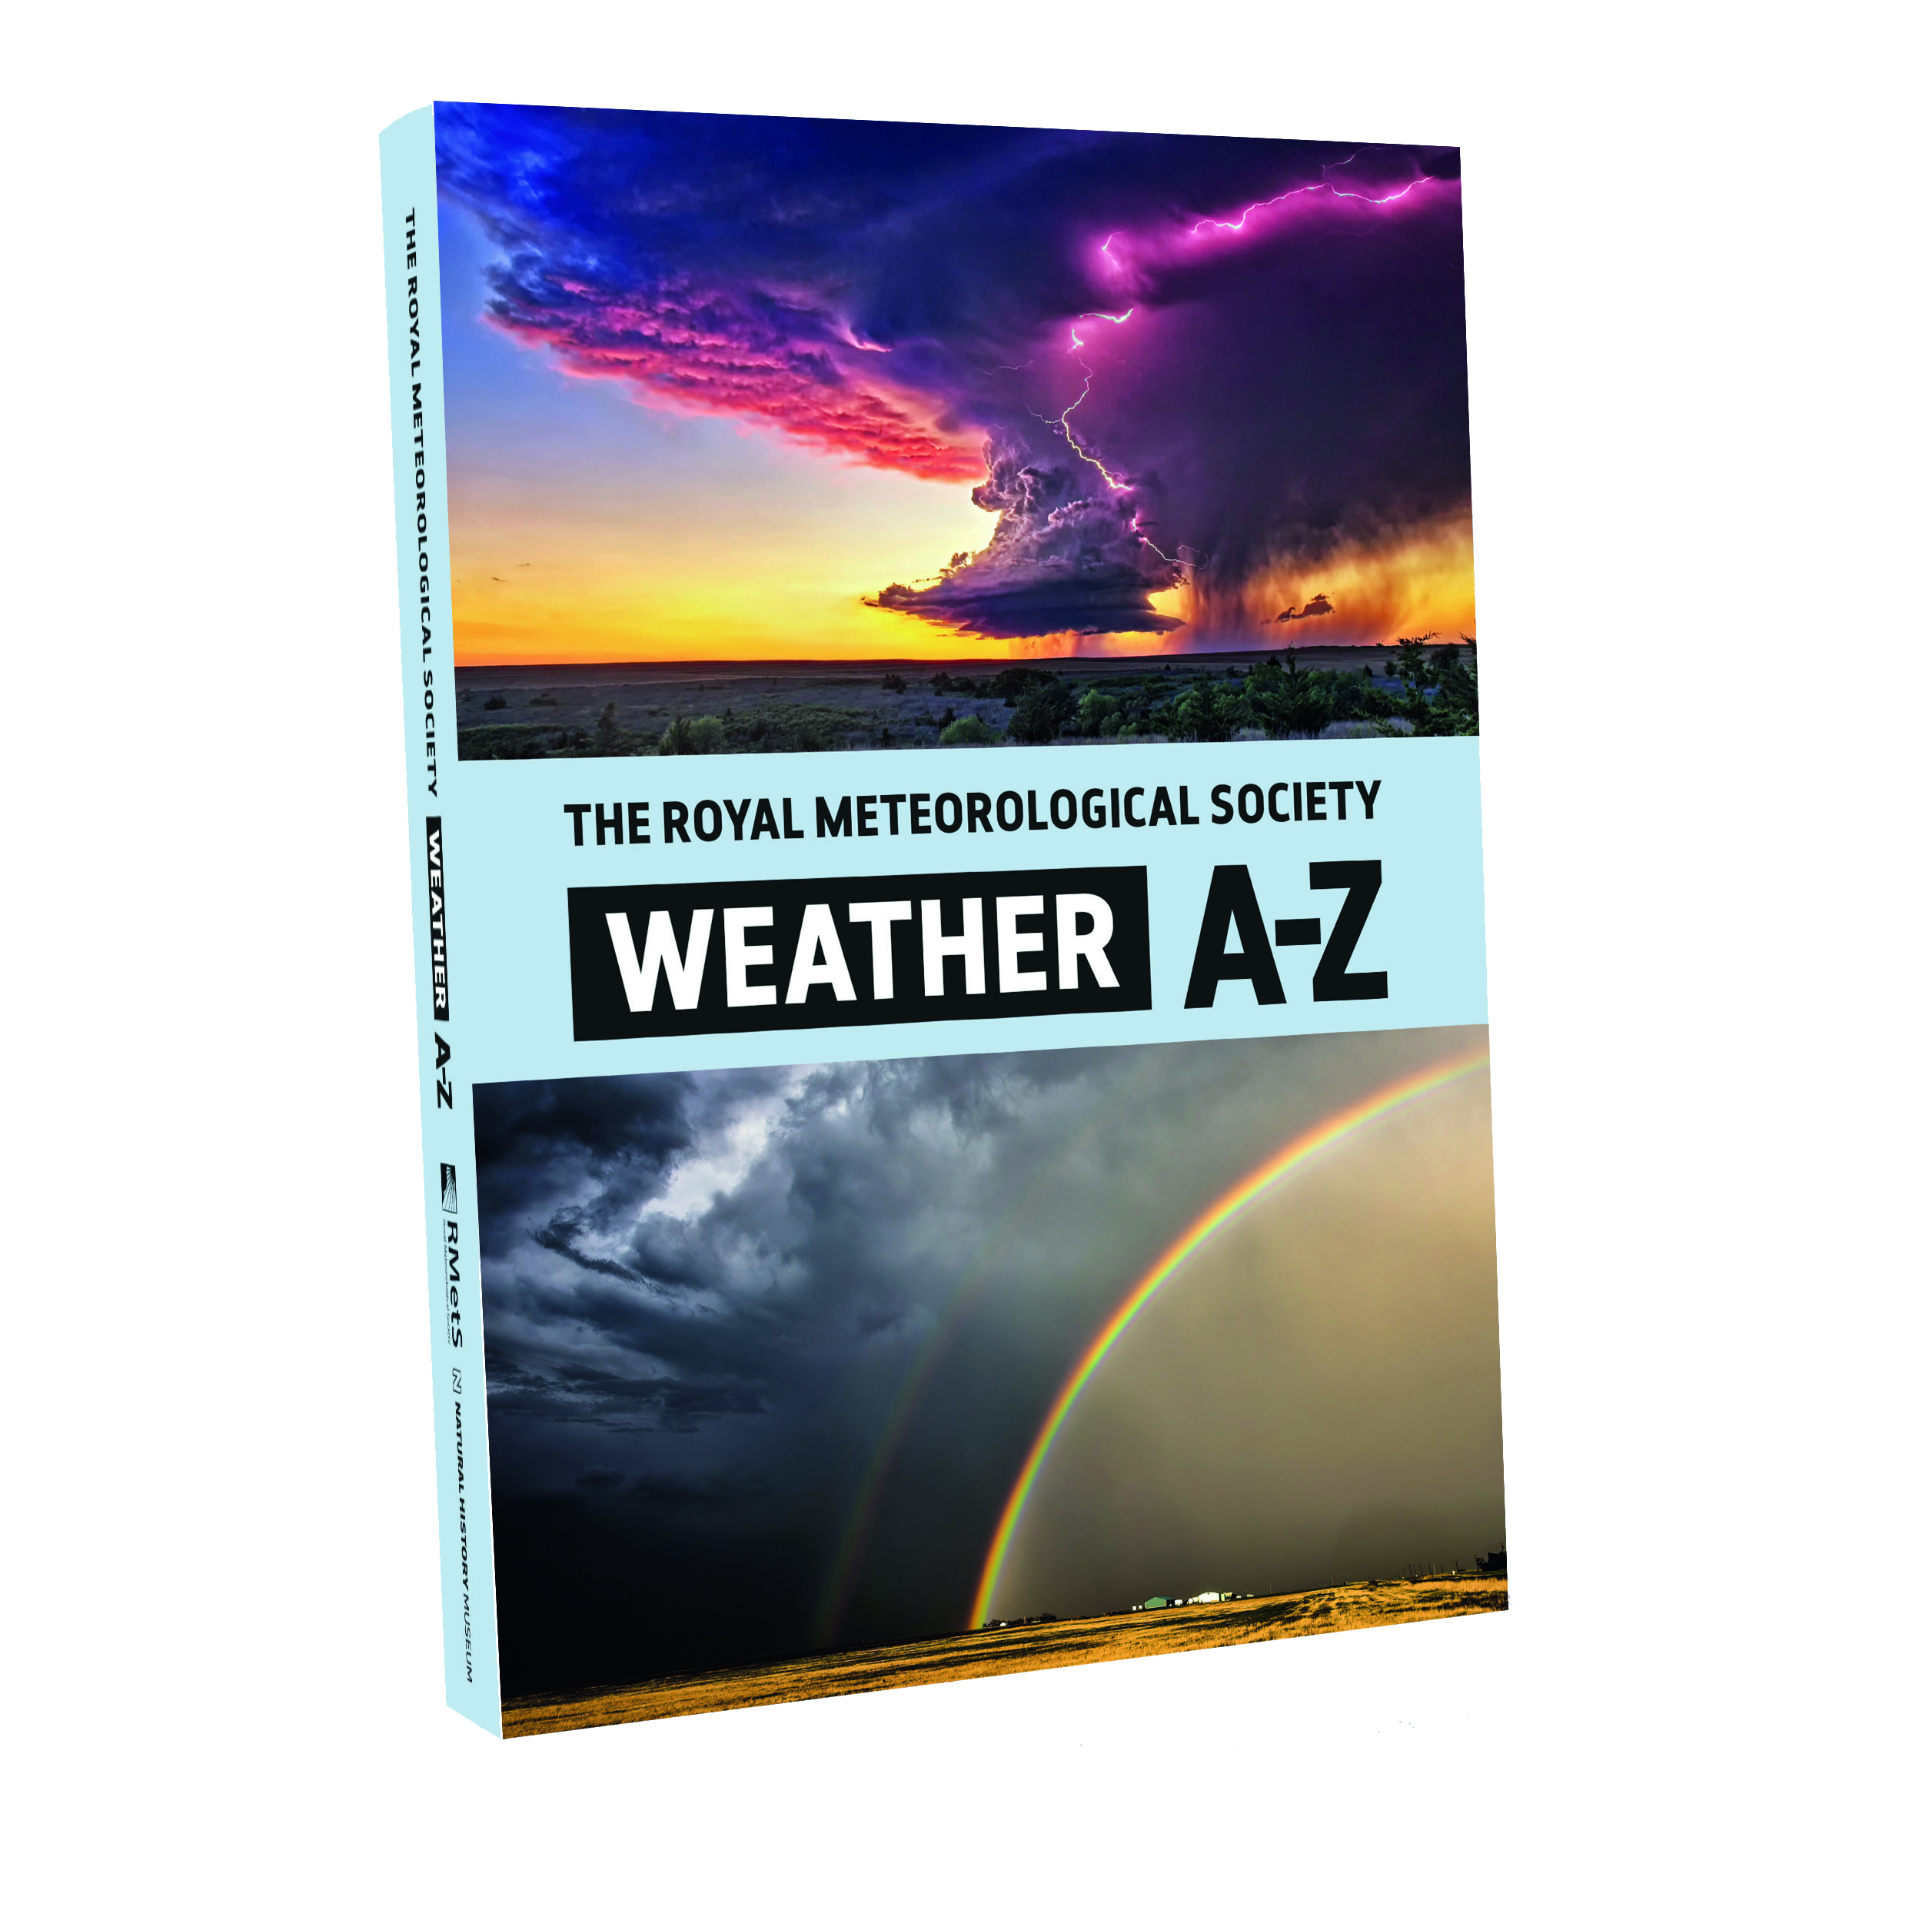 An A to Z of weather | Royal Meteorological Society